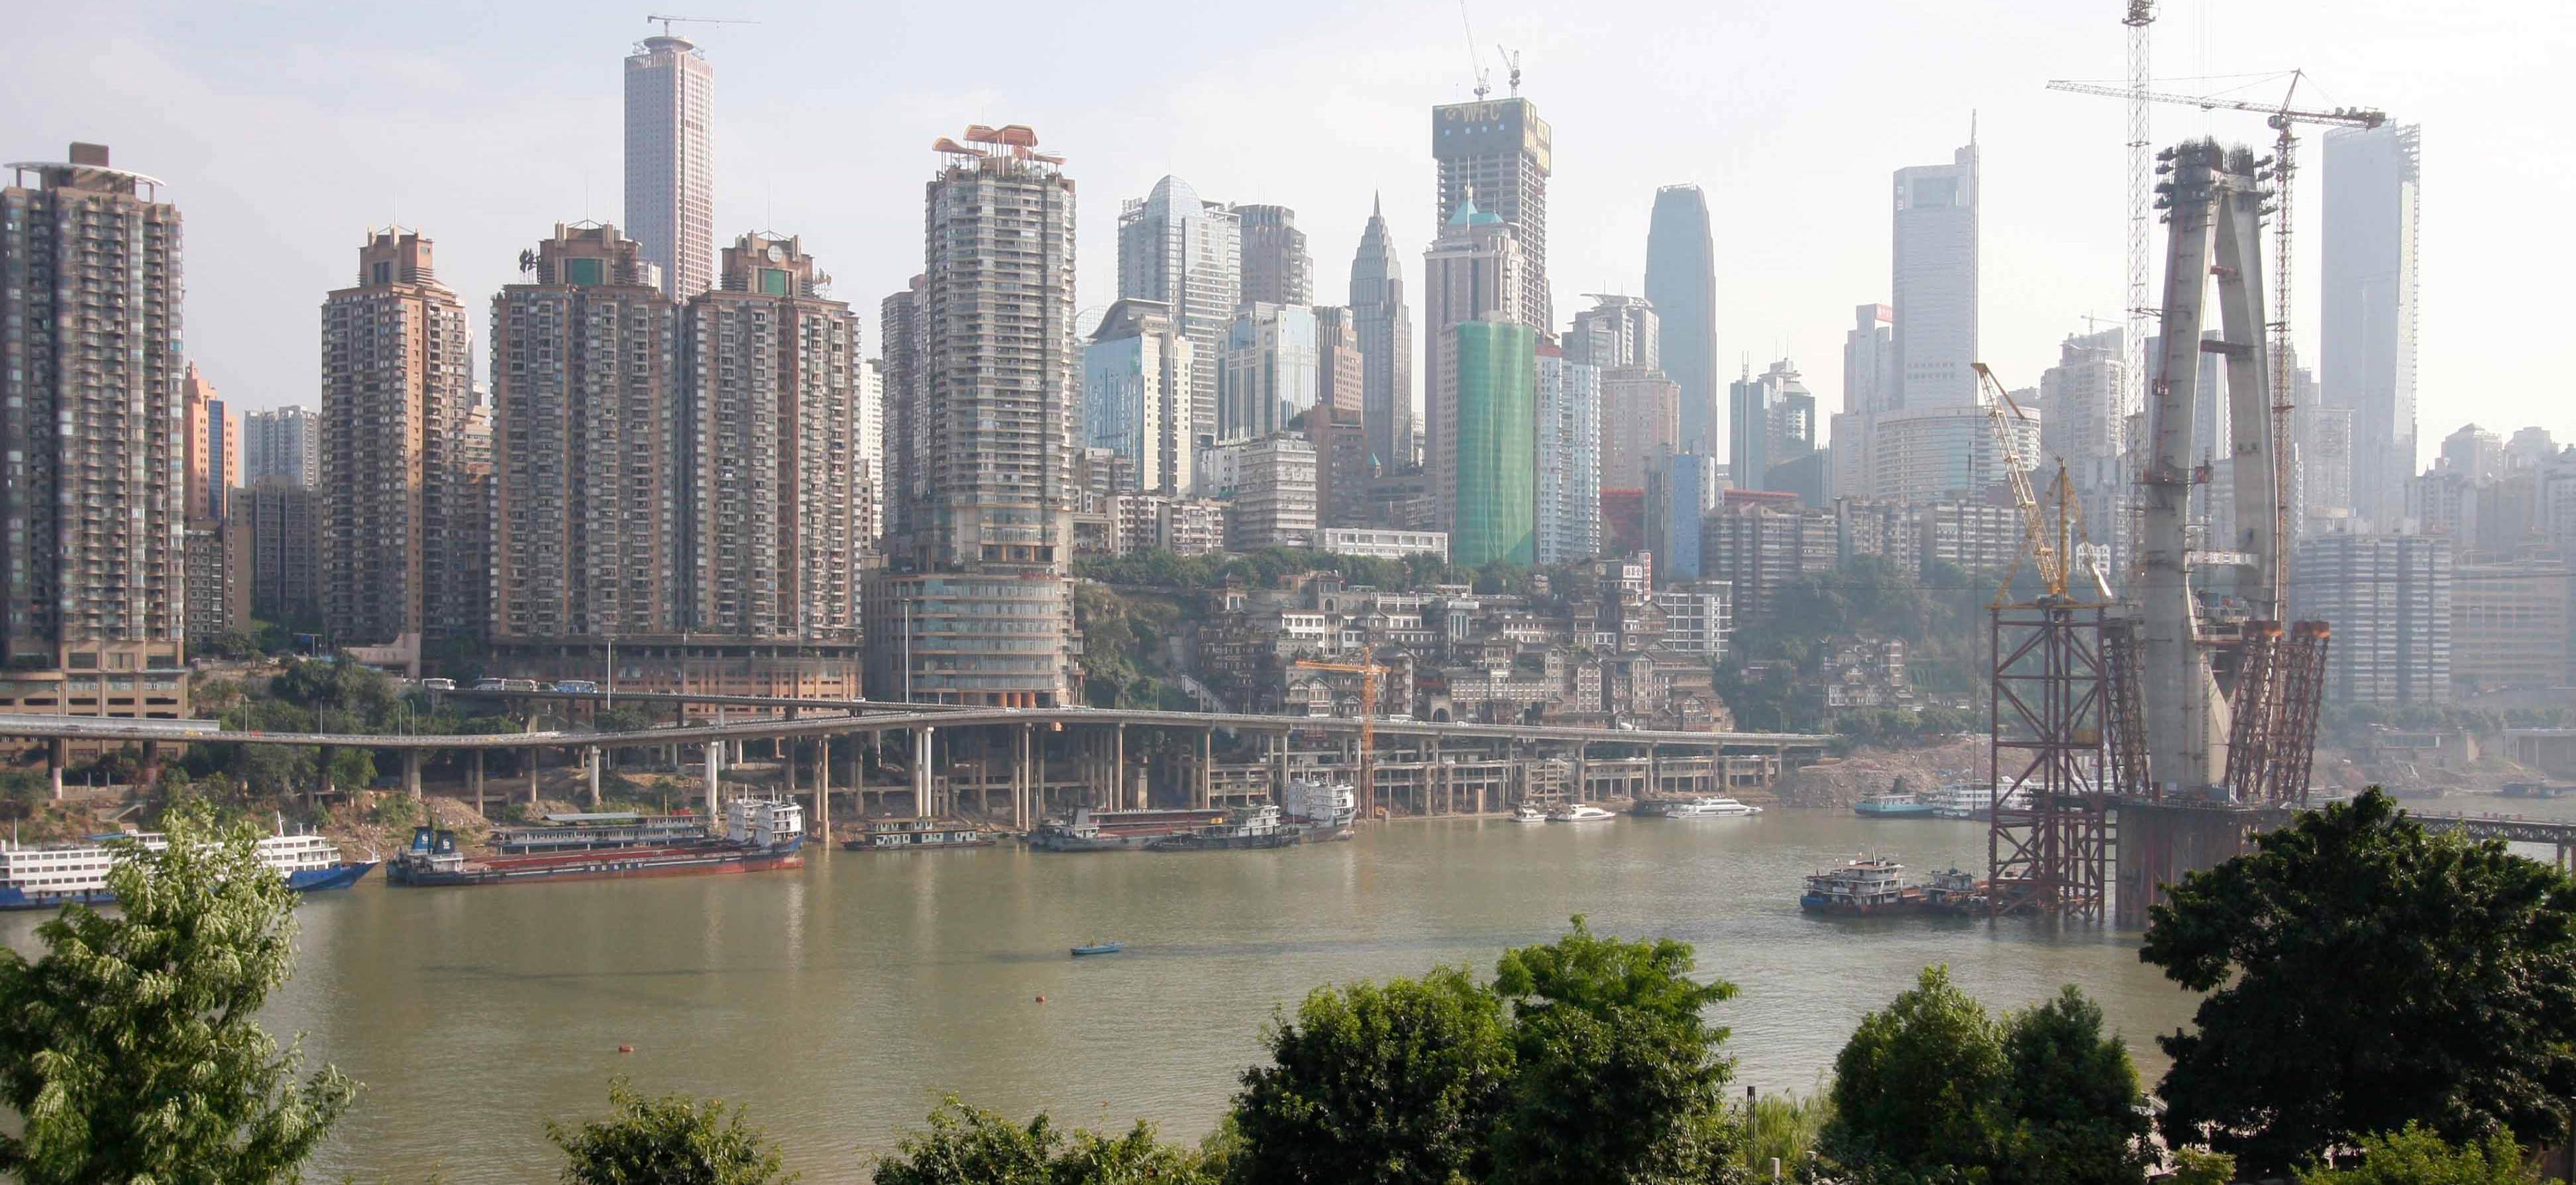 High-rise buildings, many under construction, along a river in Chongqing, China